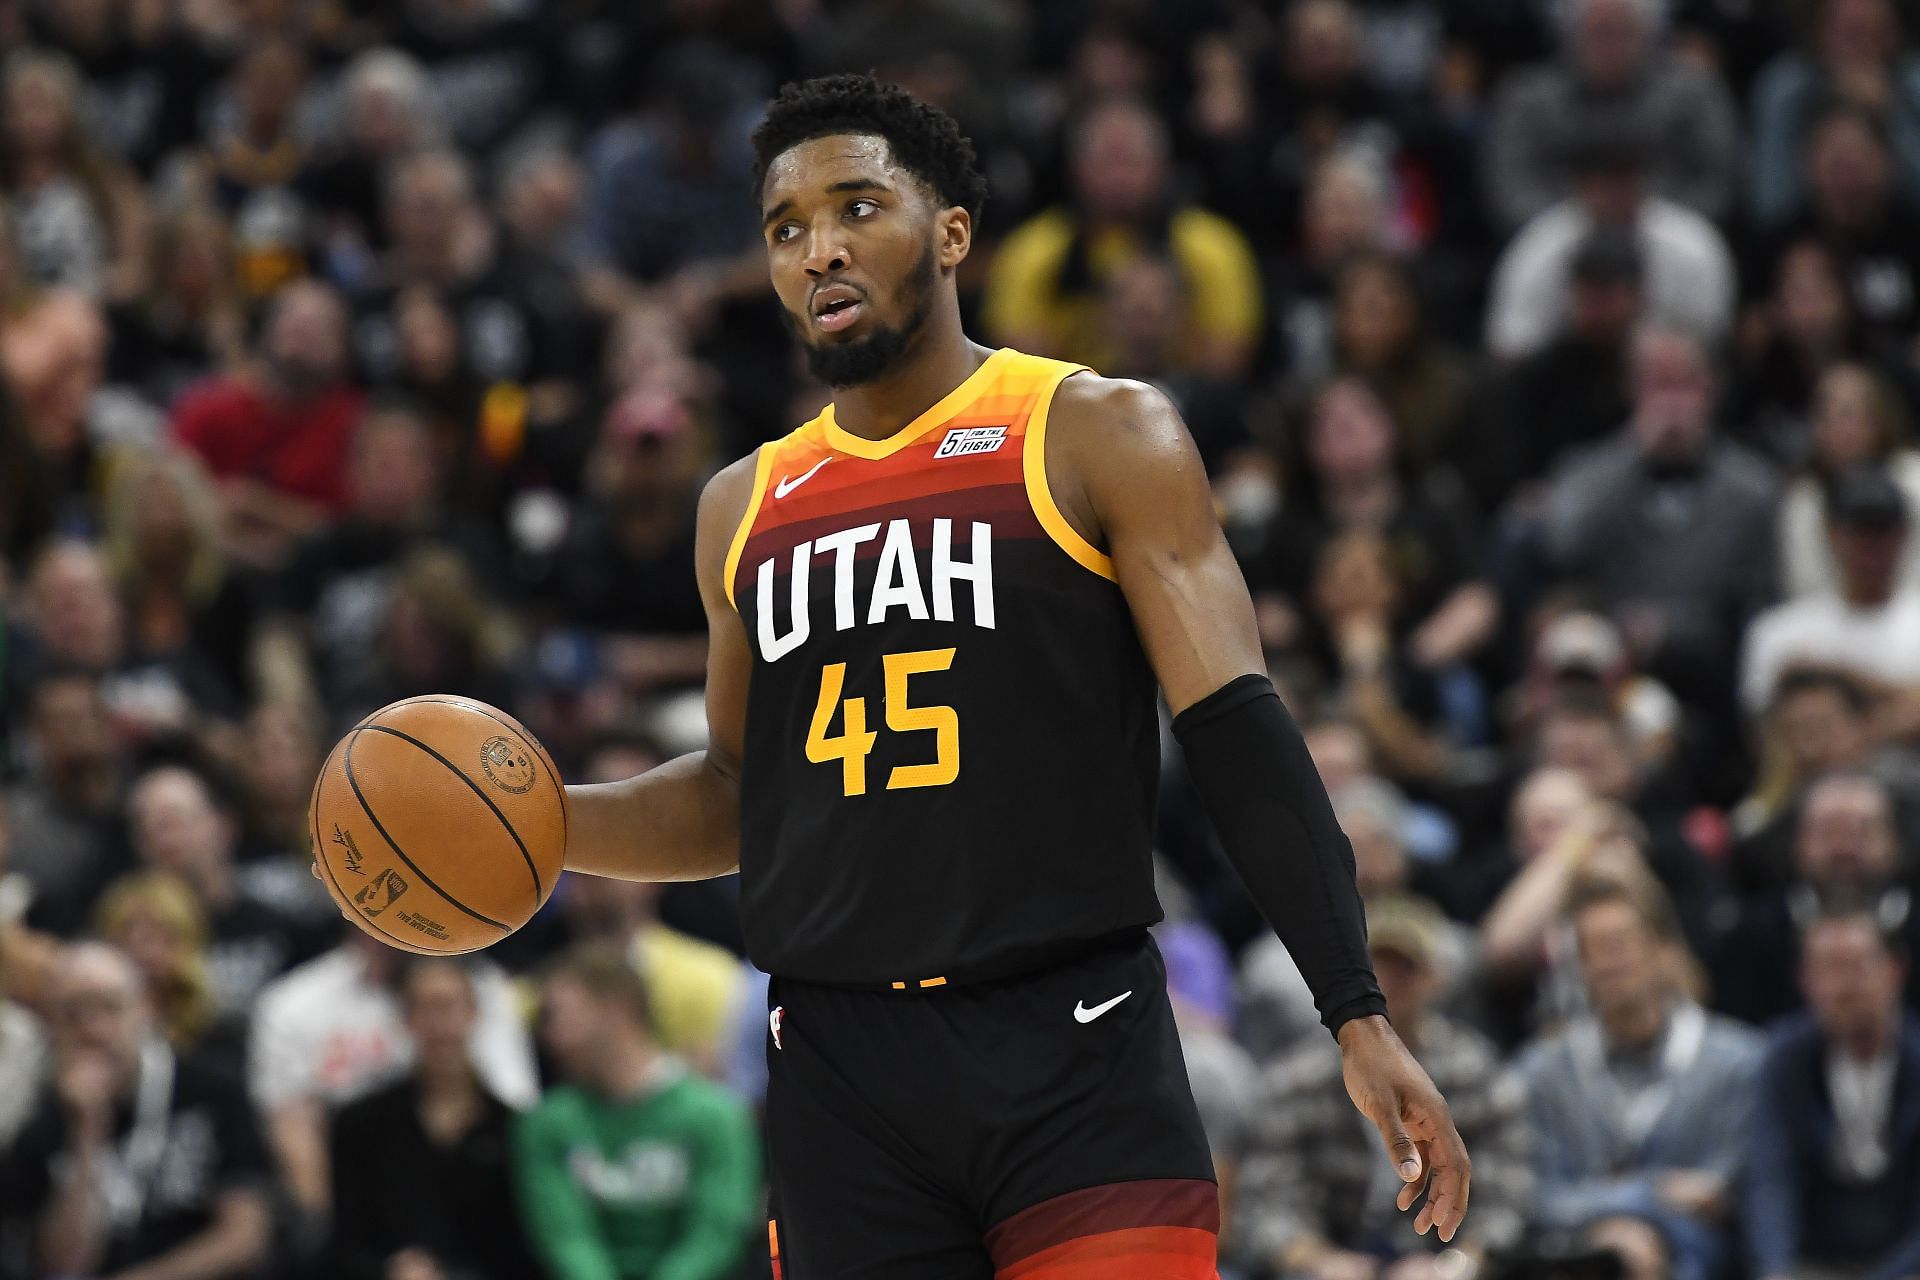 Donovan Mitchell is a 3-time NBA All-Star